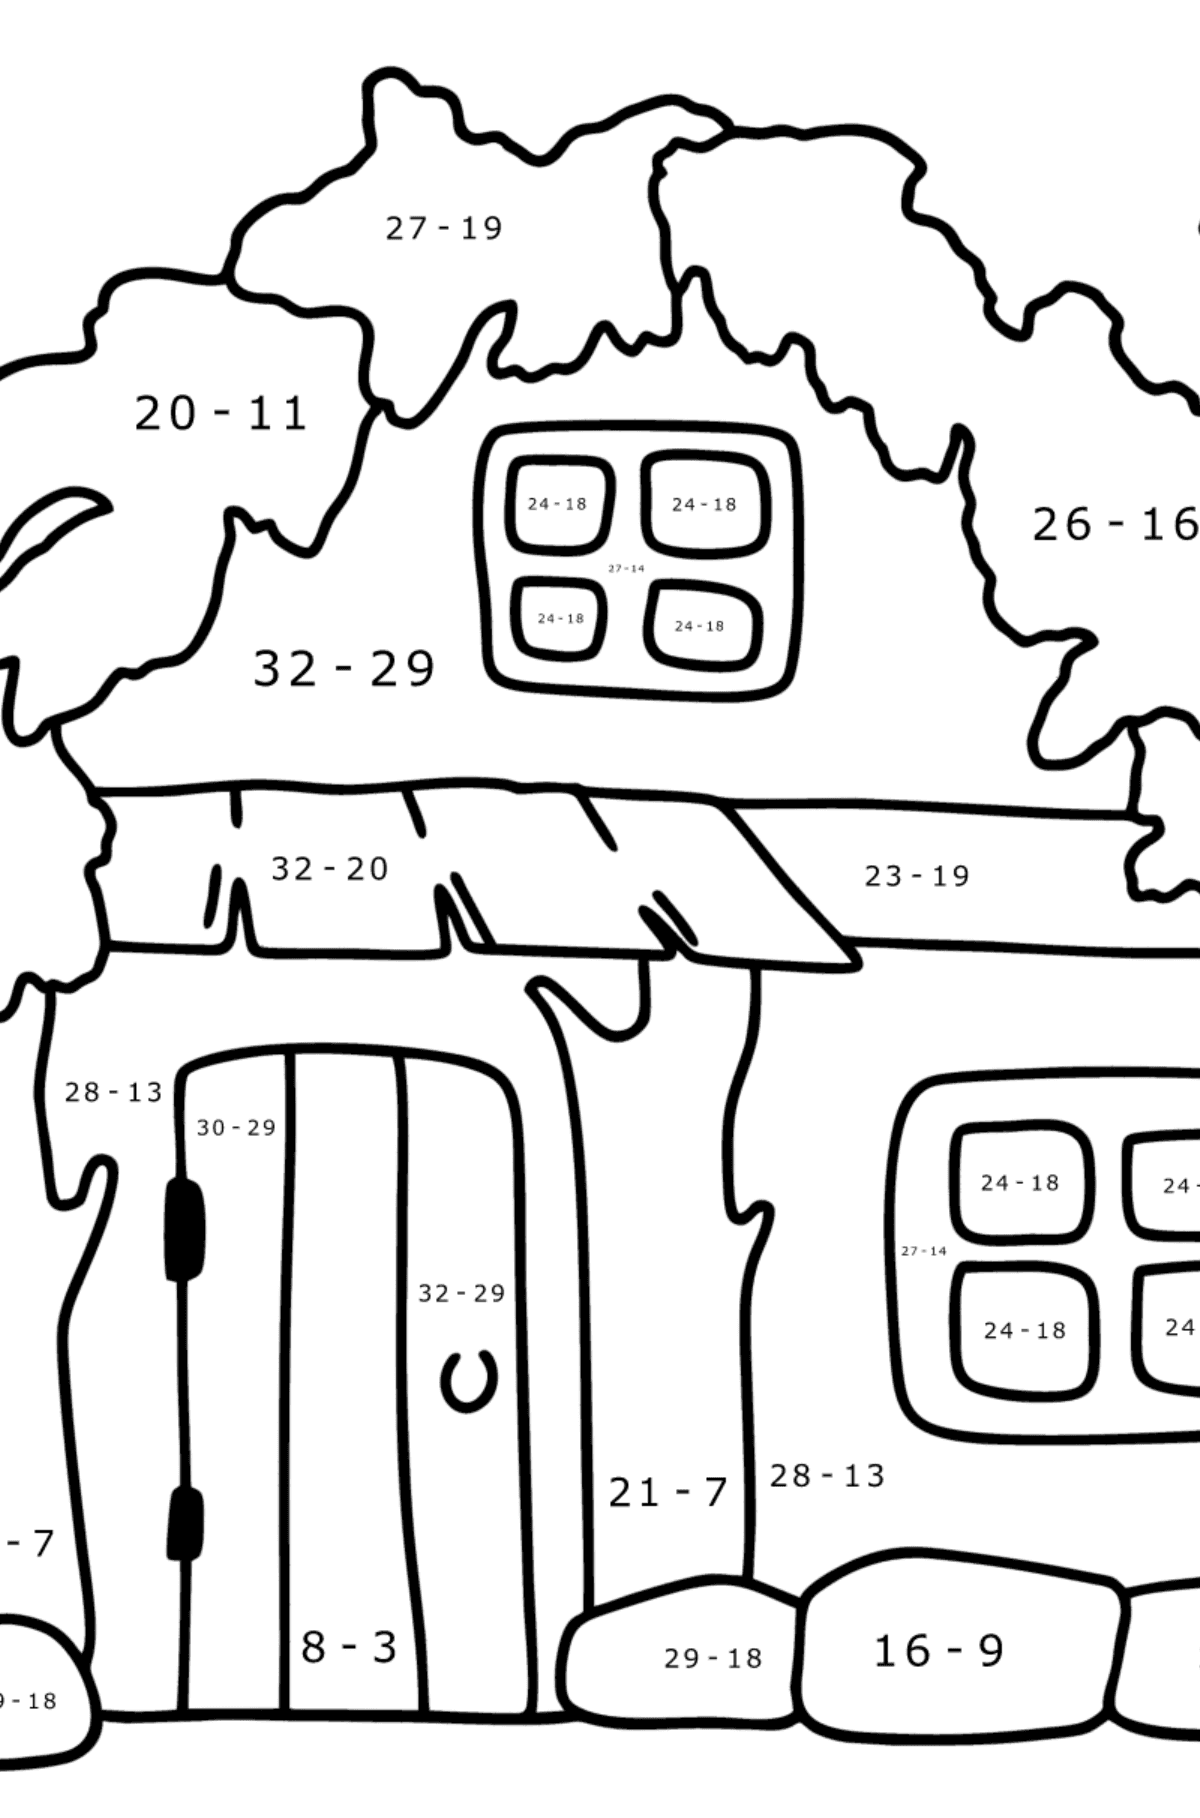 Hut coloring page - Math Coloring - Subtraction for Kids